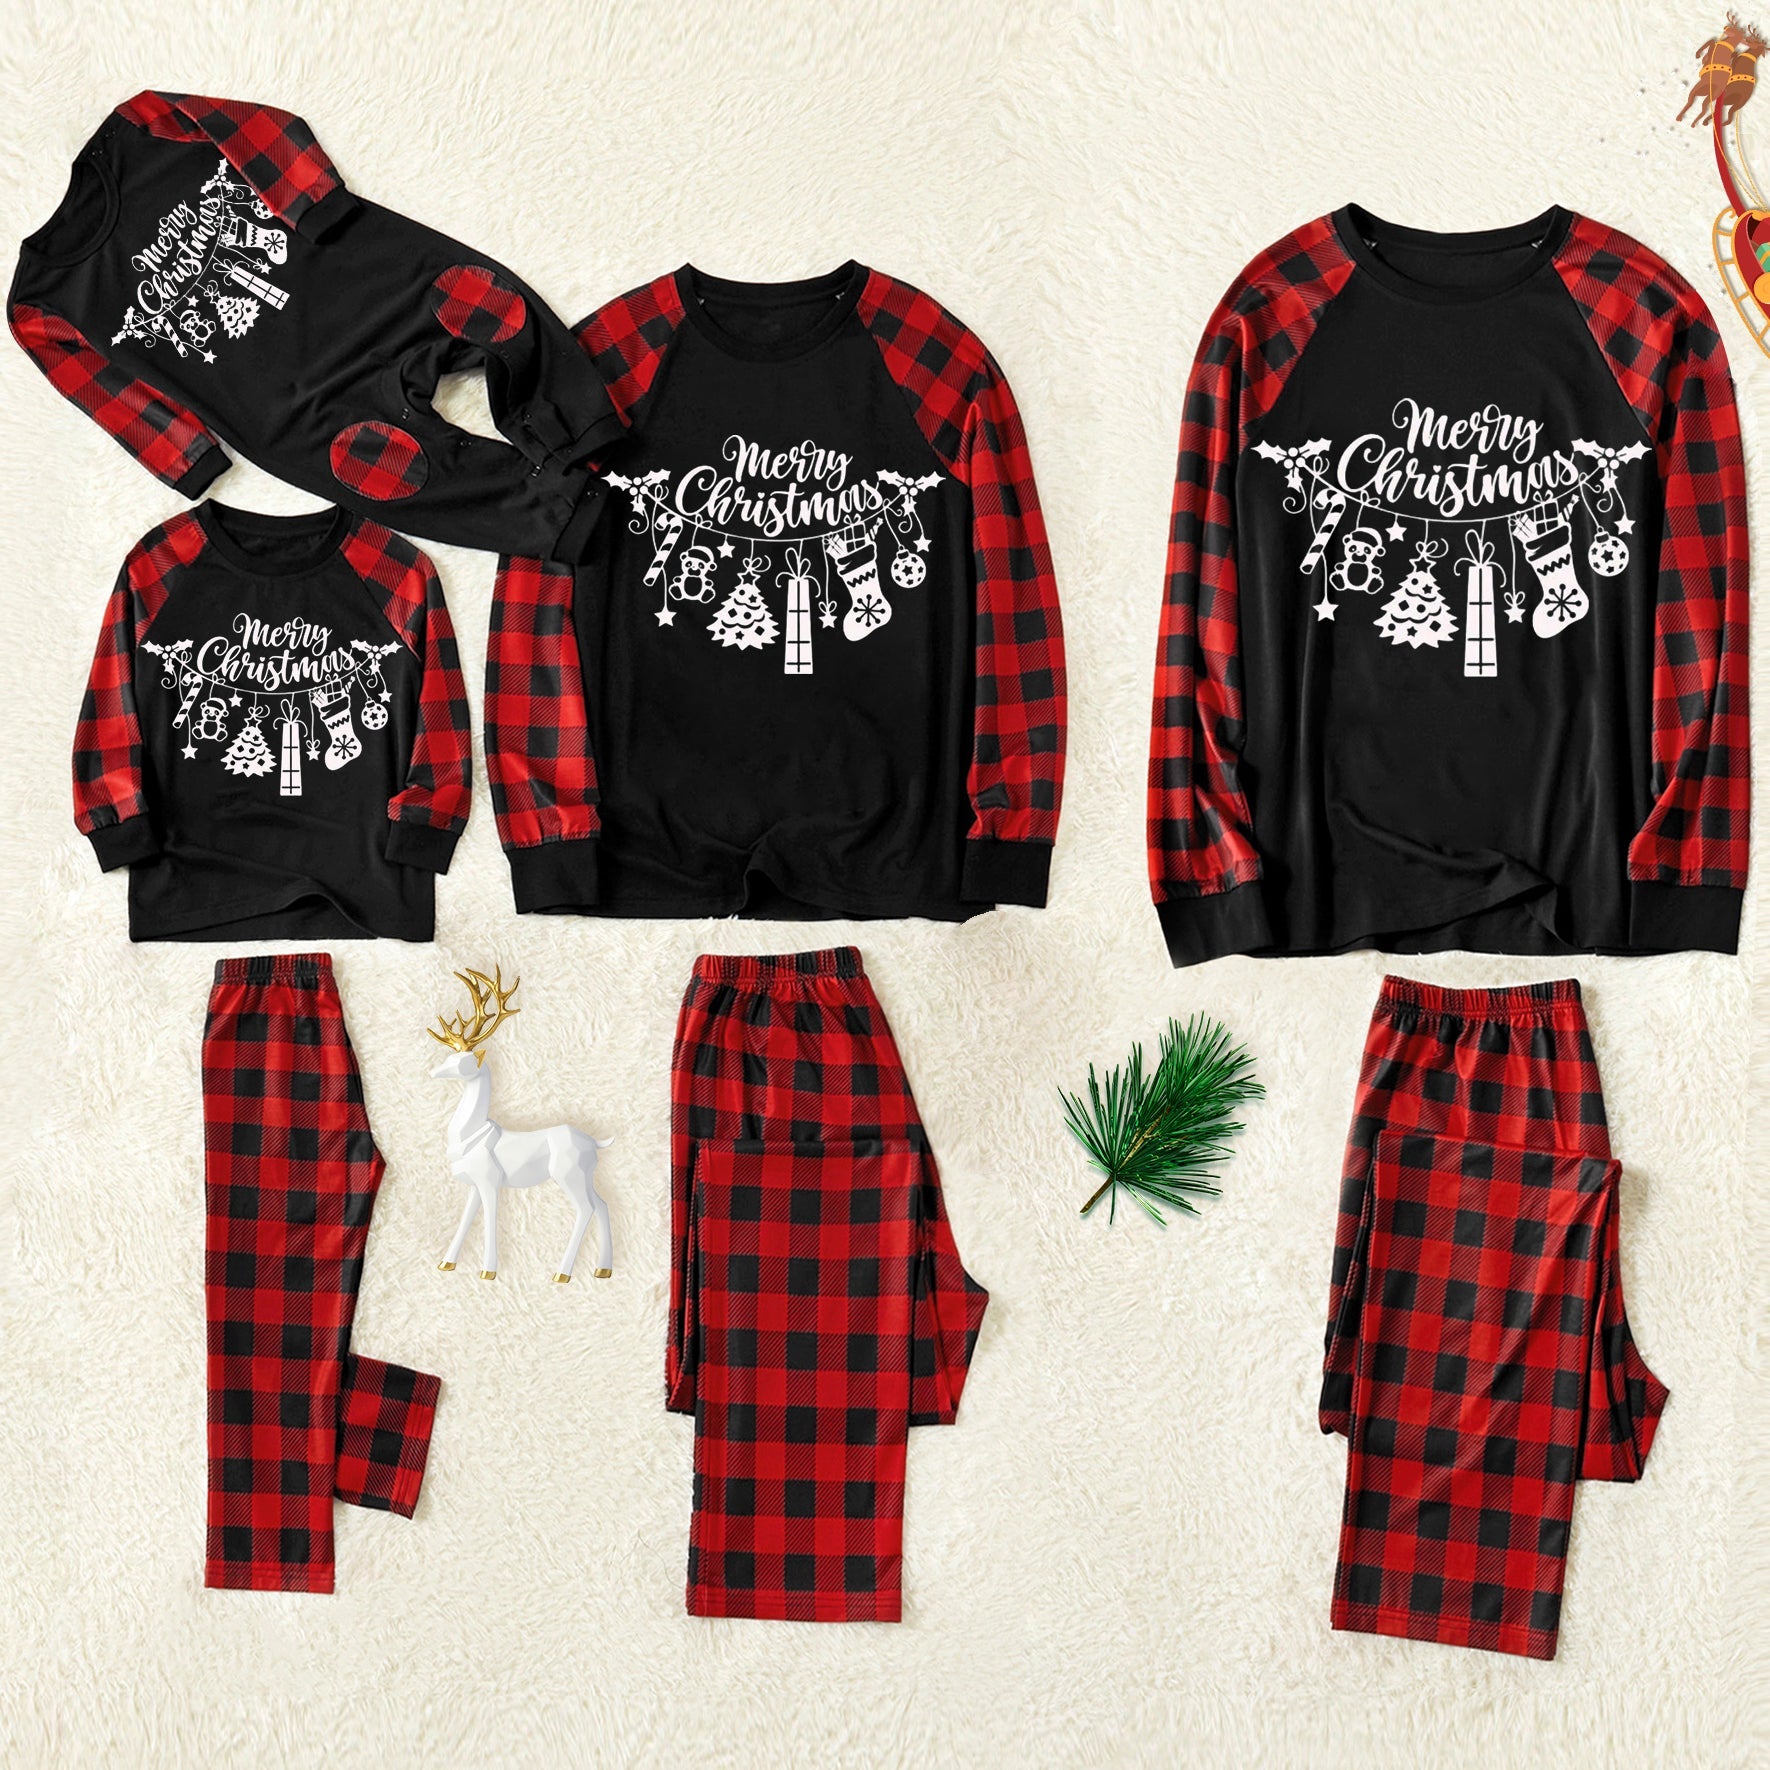 Christmas Gift Patterned and 'Merry Christmas' Letter Print Patterned Contrast Black top and Black & Red Plaid Pants Family Matching Pajamas Set